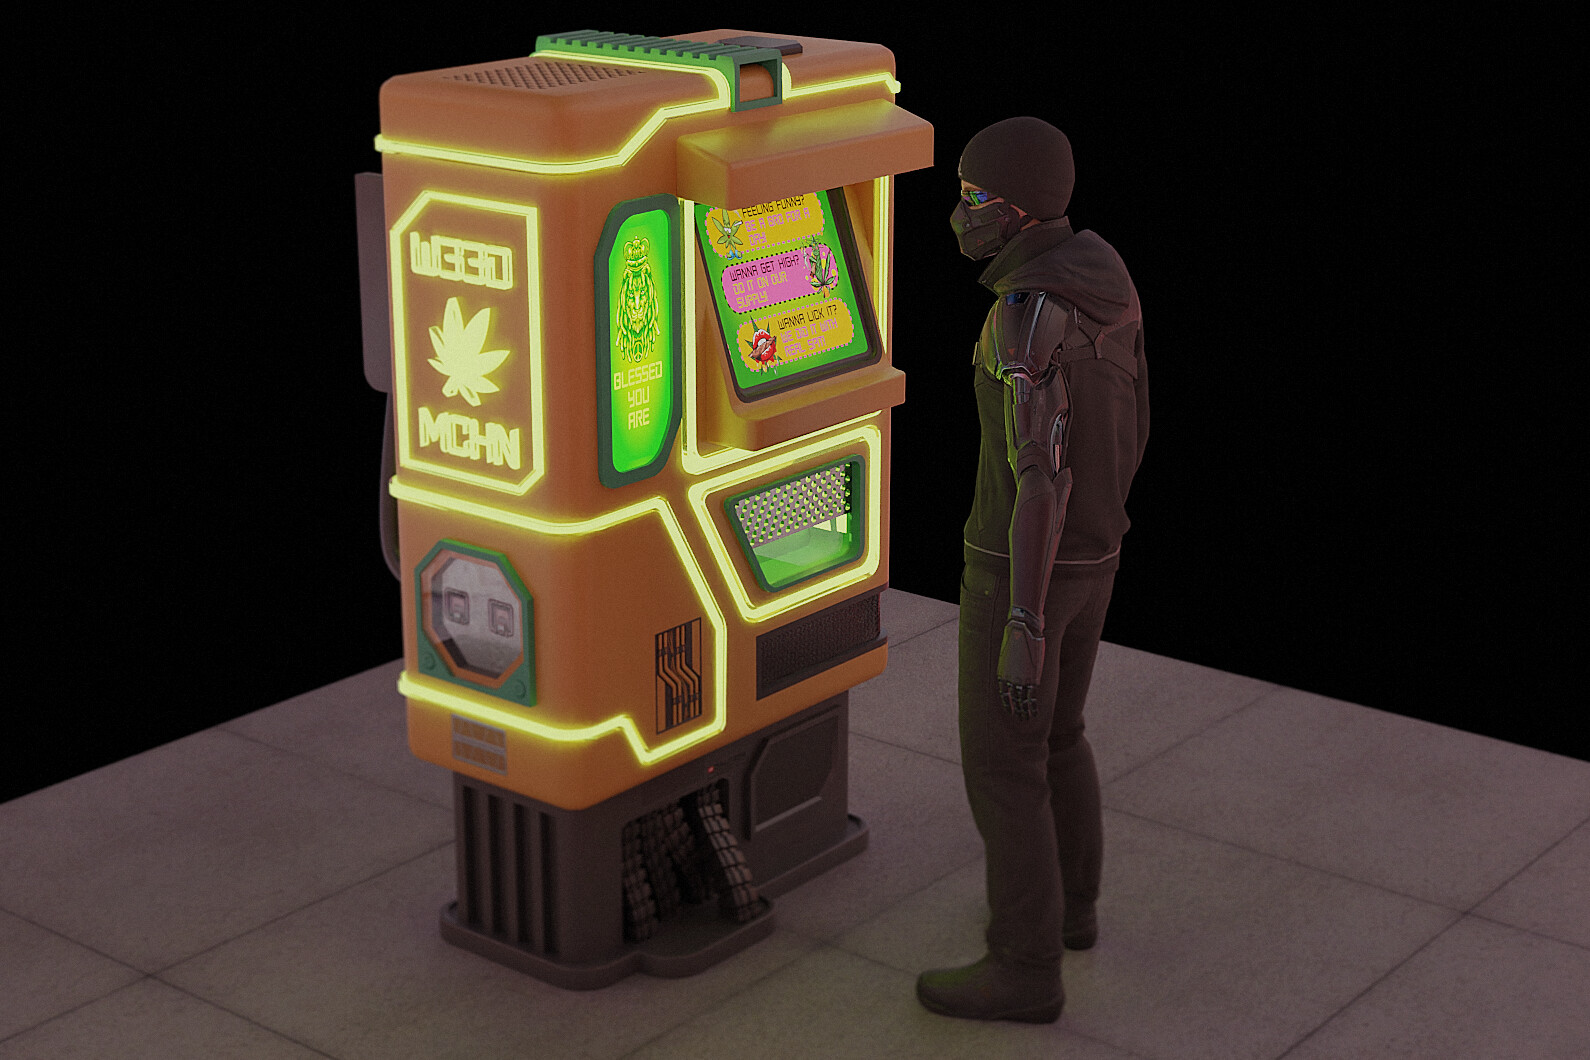 A weed dispenser.

character by courtesy of 4d_Bob from Sketchfab.com